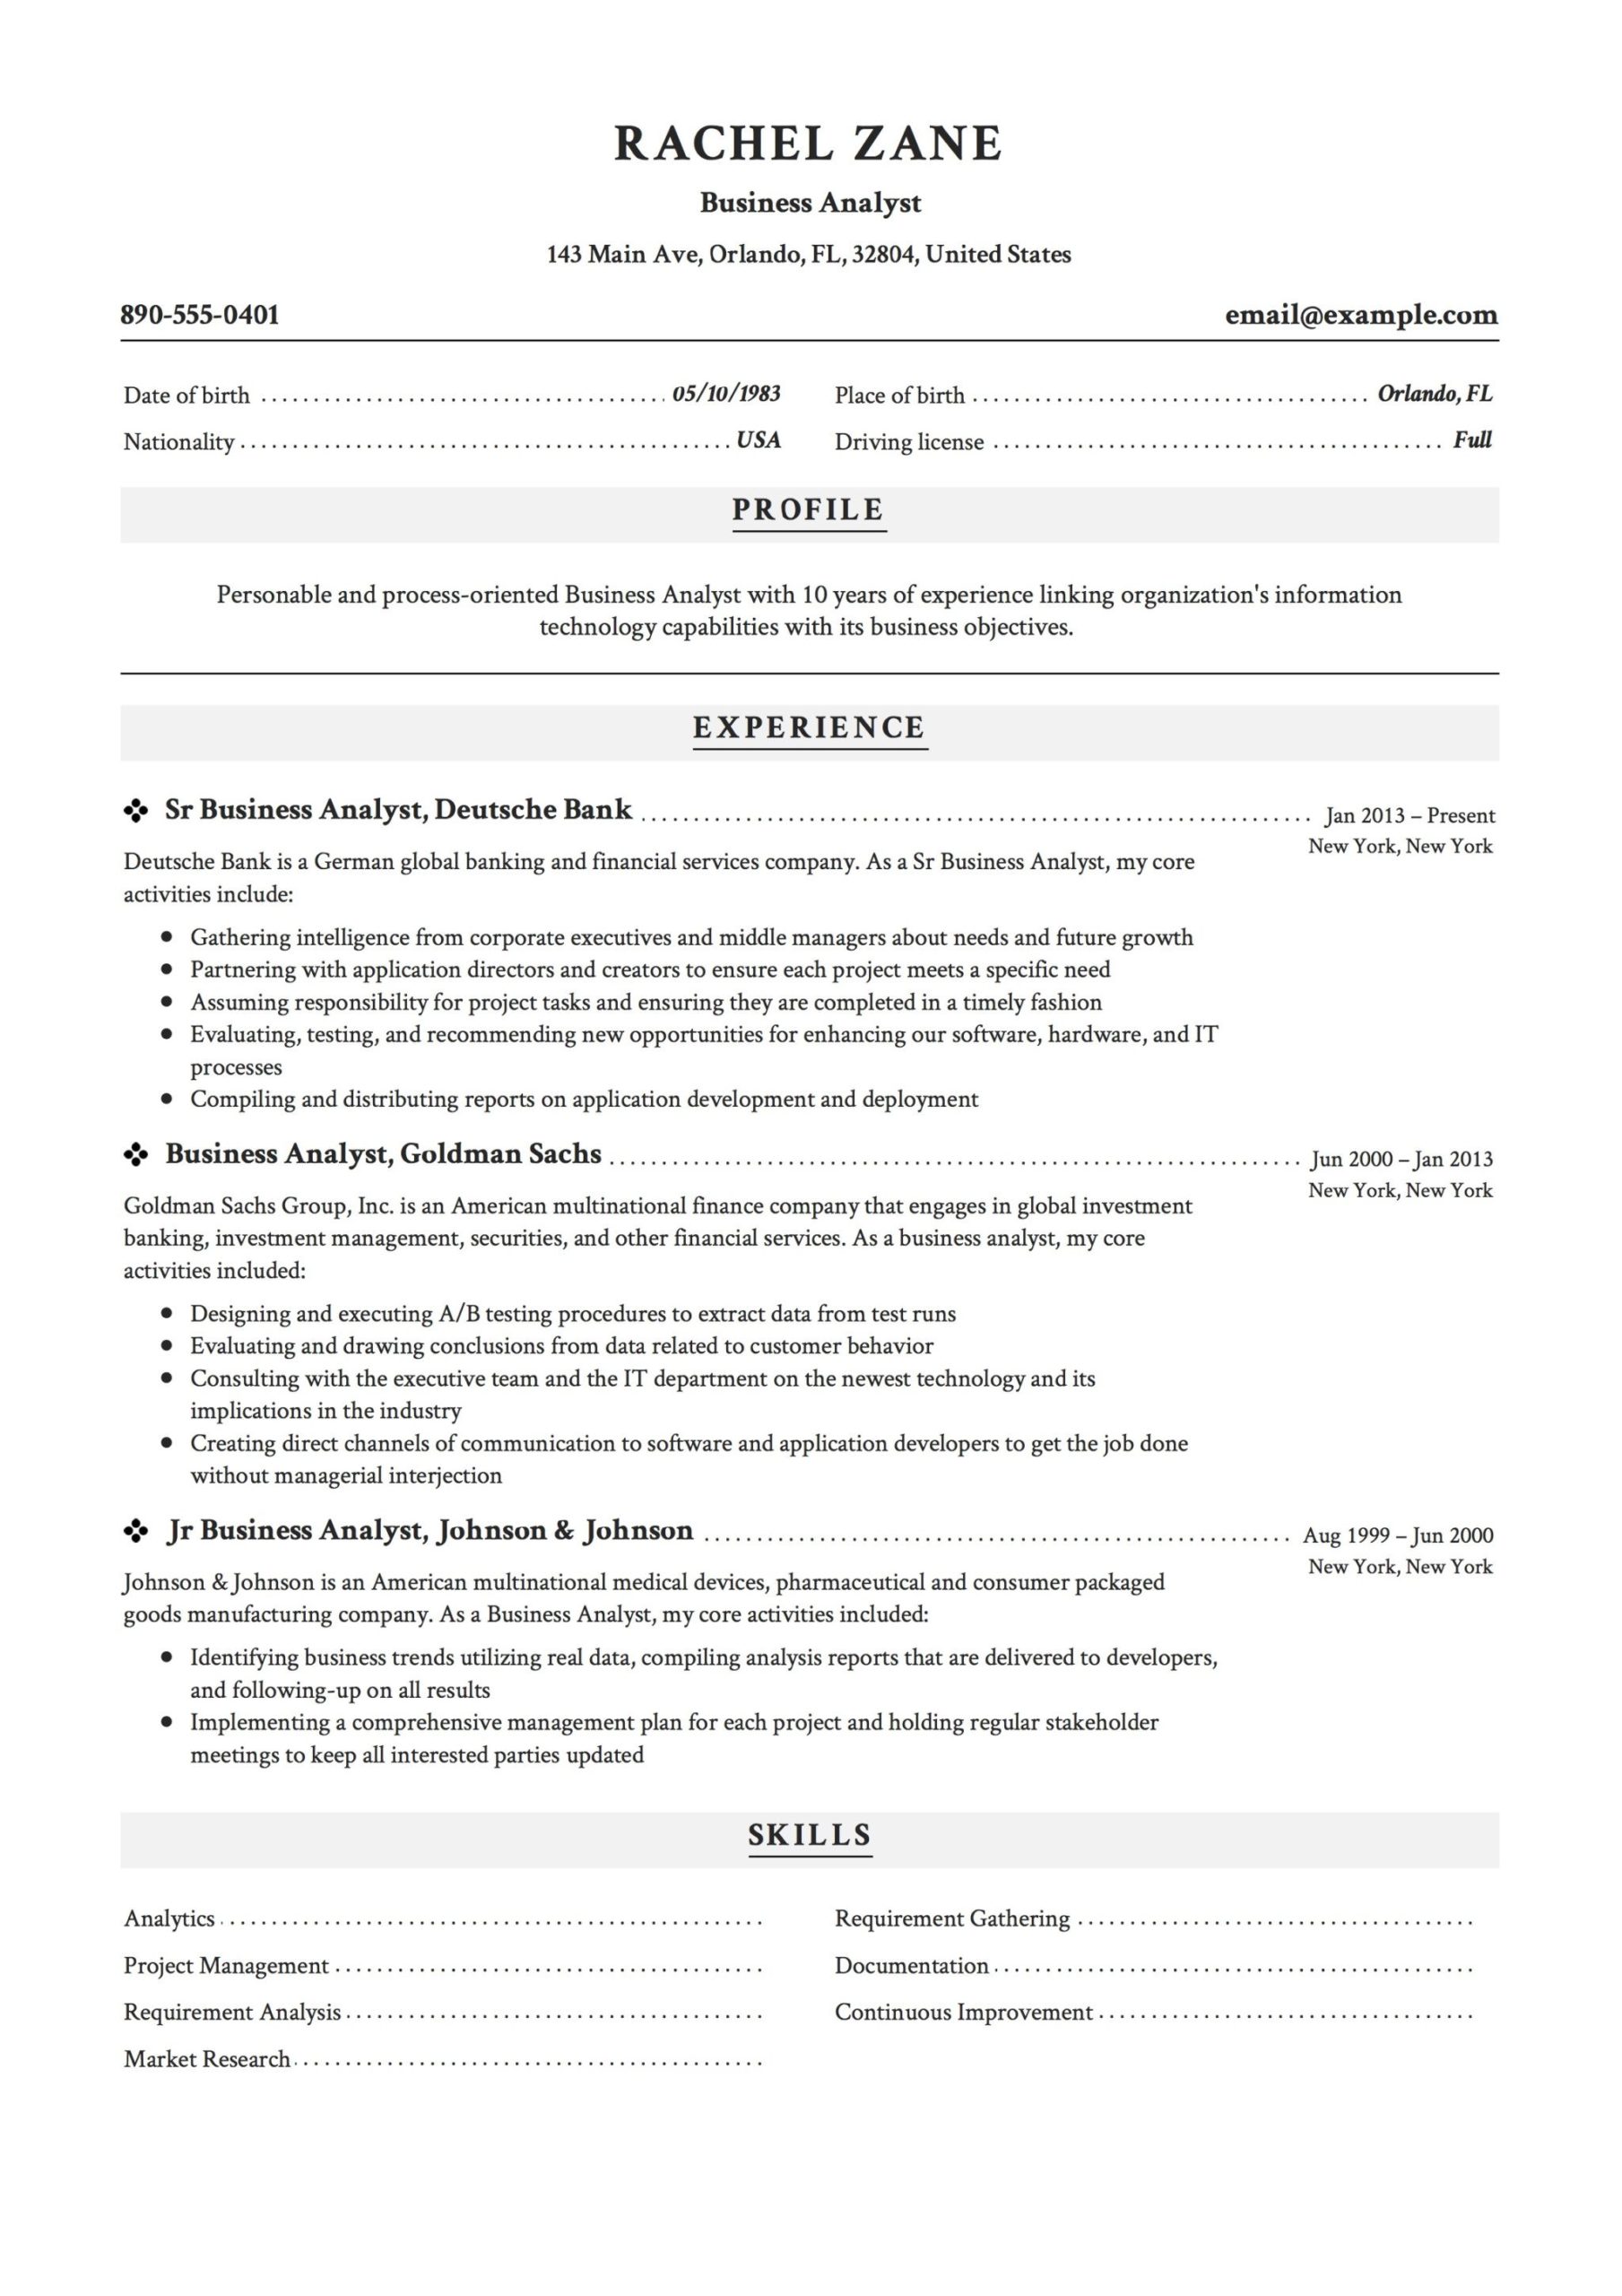 Vp Of Business Operations and Analytics Resume Sample Business Analyst Resume Examples & Writing Guide 2022